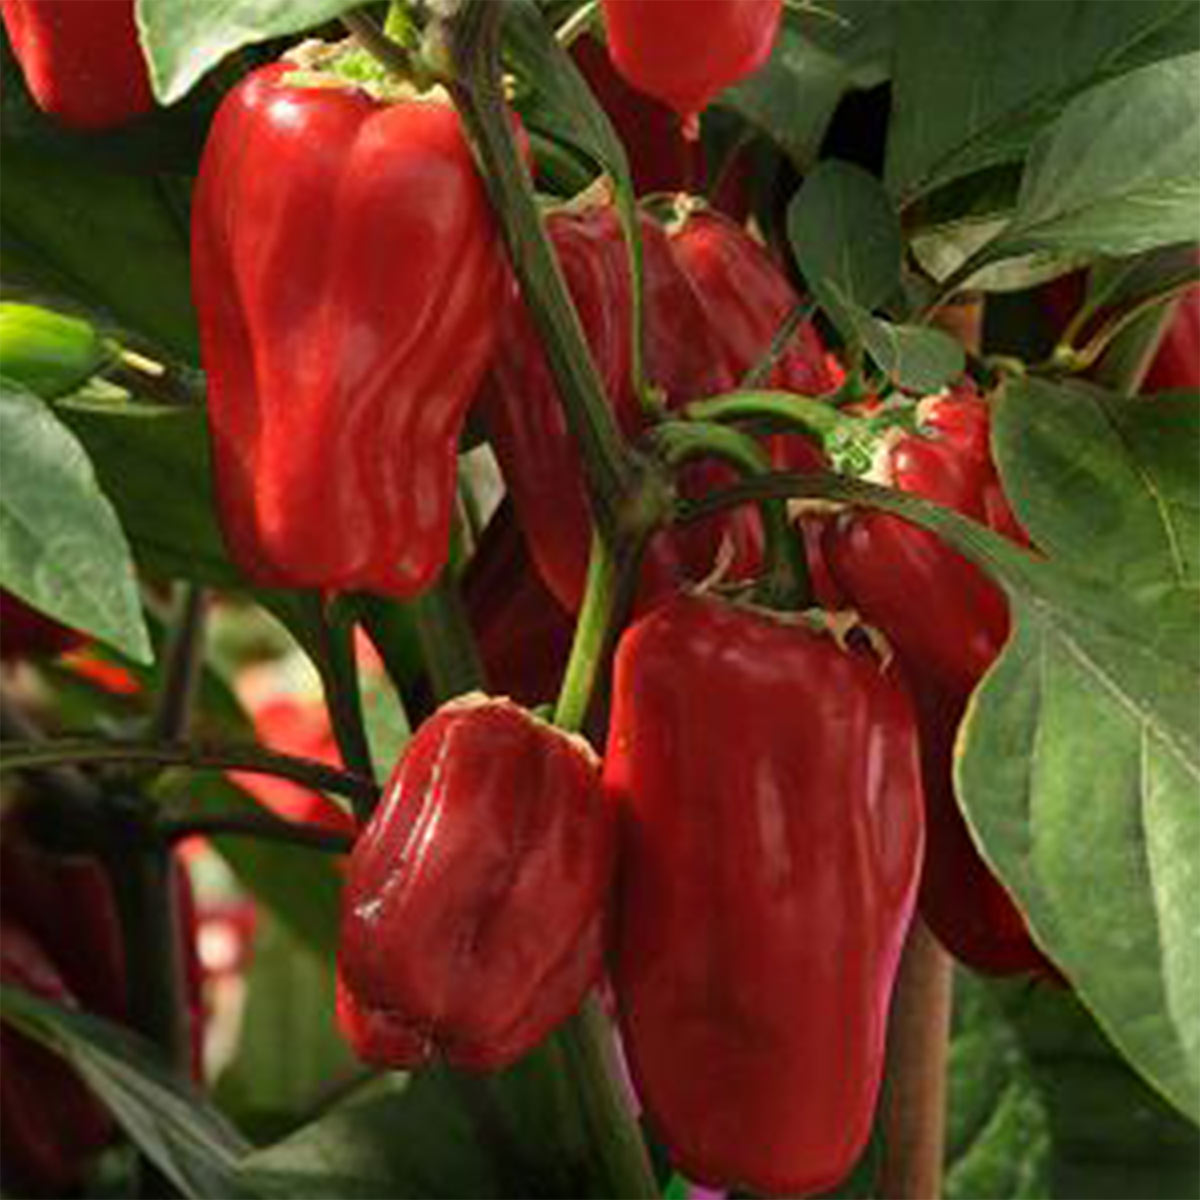 Pepper Joe's Sweet Heat Pepper Seeds - multiple red thick peppers hanging on plant